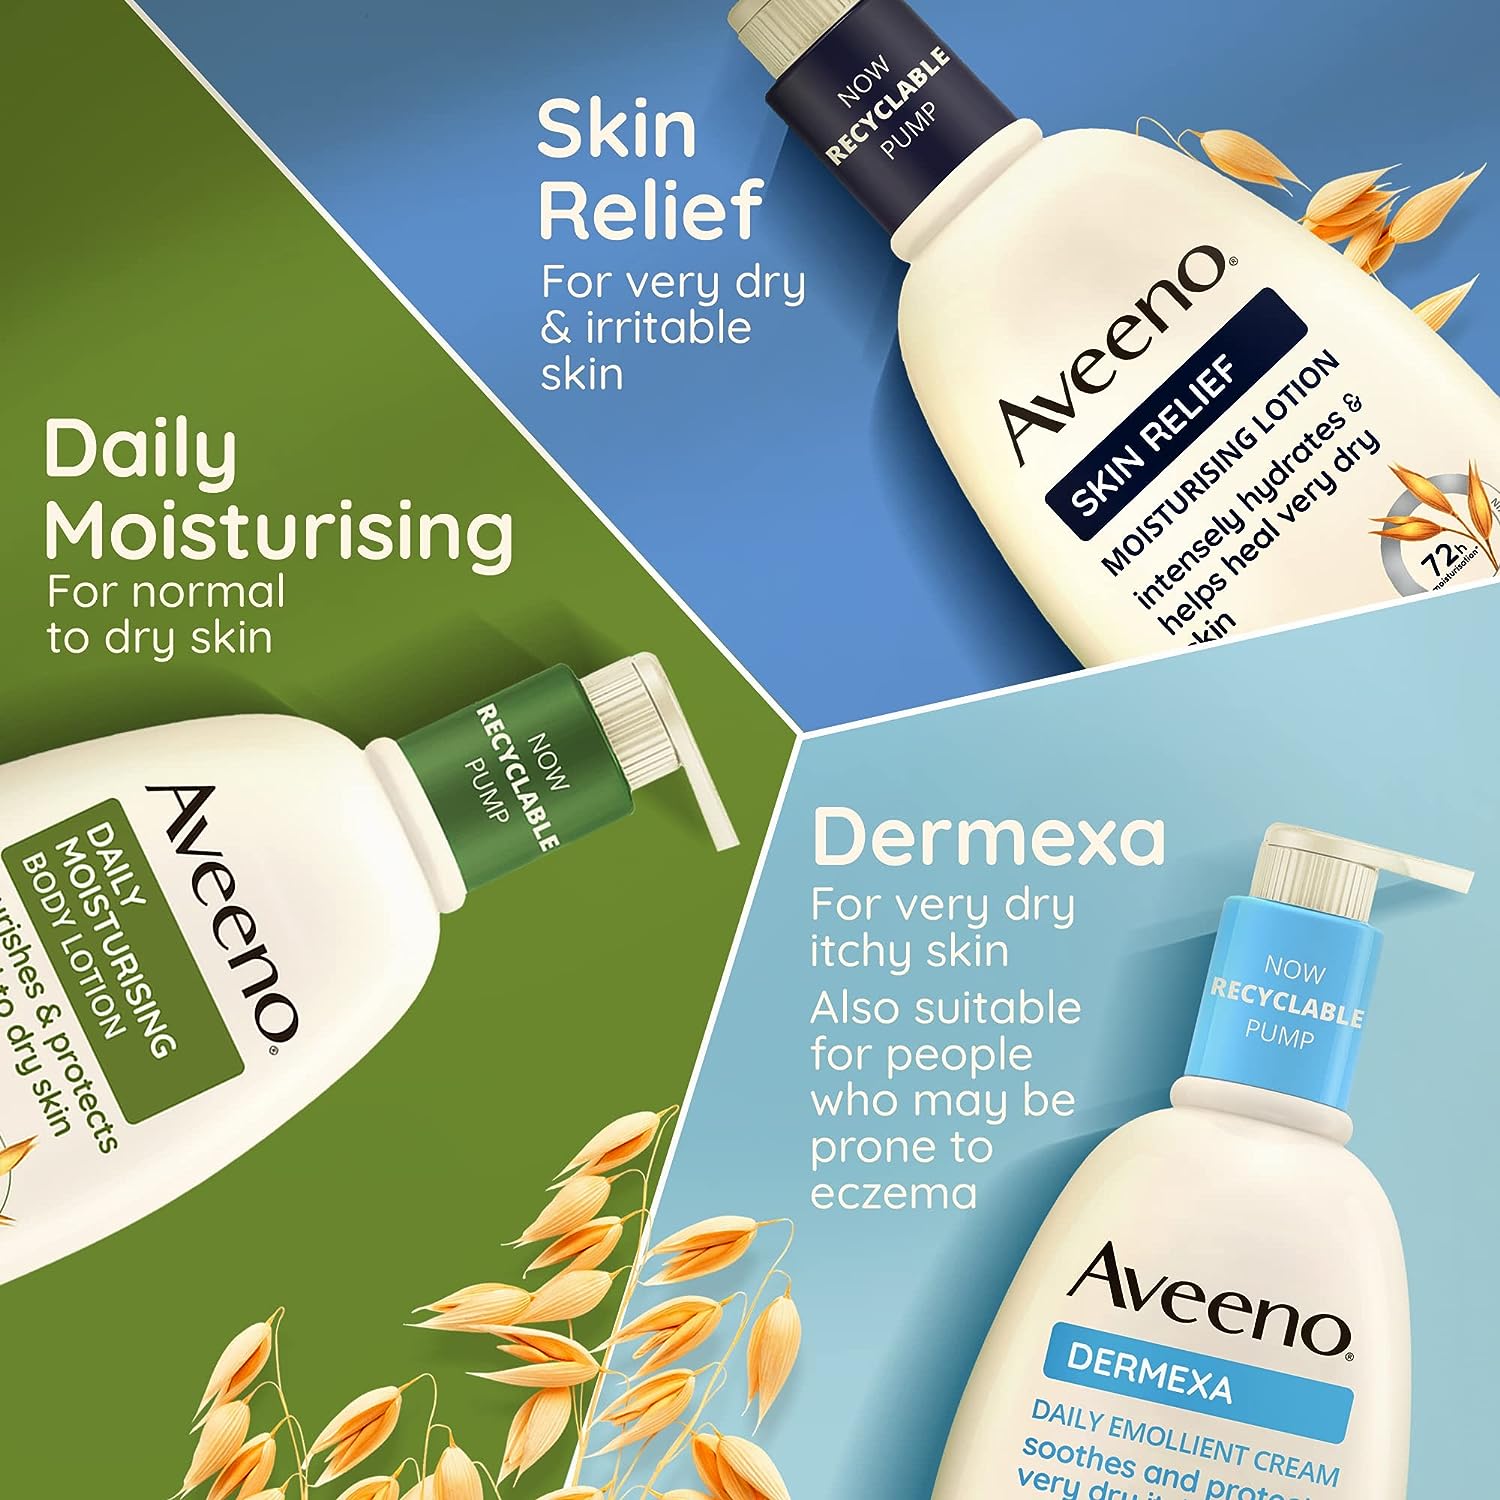 Aveeno Dermexa Daily Emollient Body Wash, Gently cleanses and Soothes, For Very Dry Itchy Also Eczema Prone Skin, 300 ml